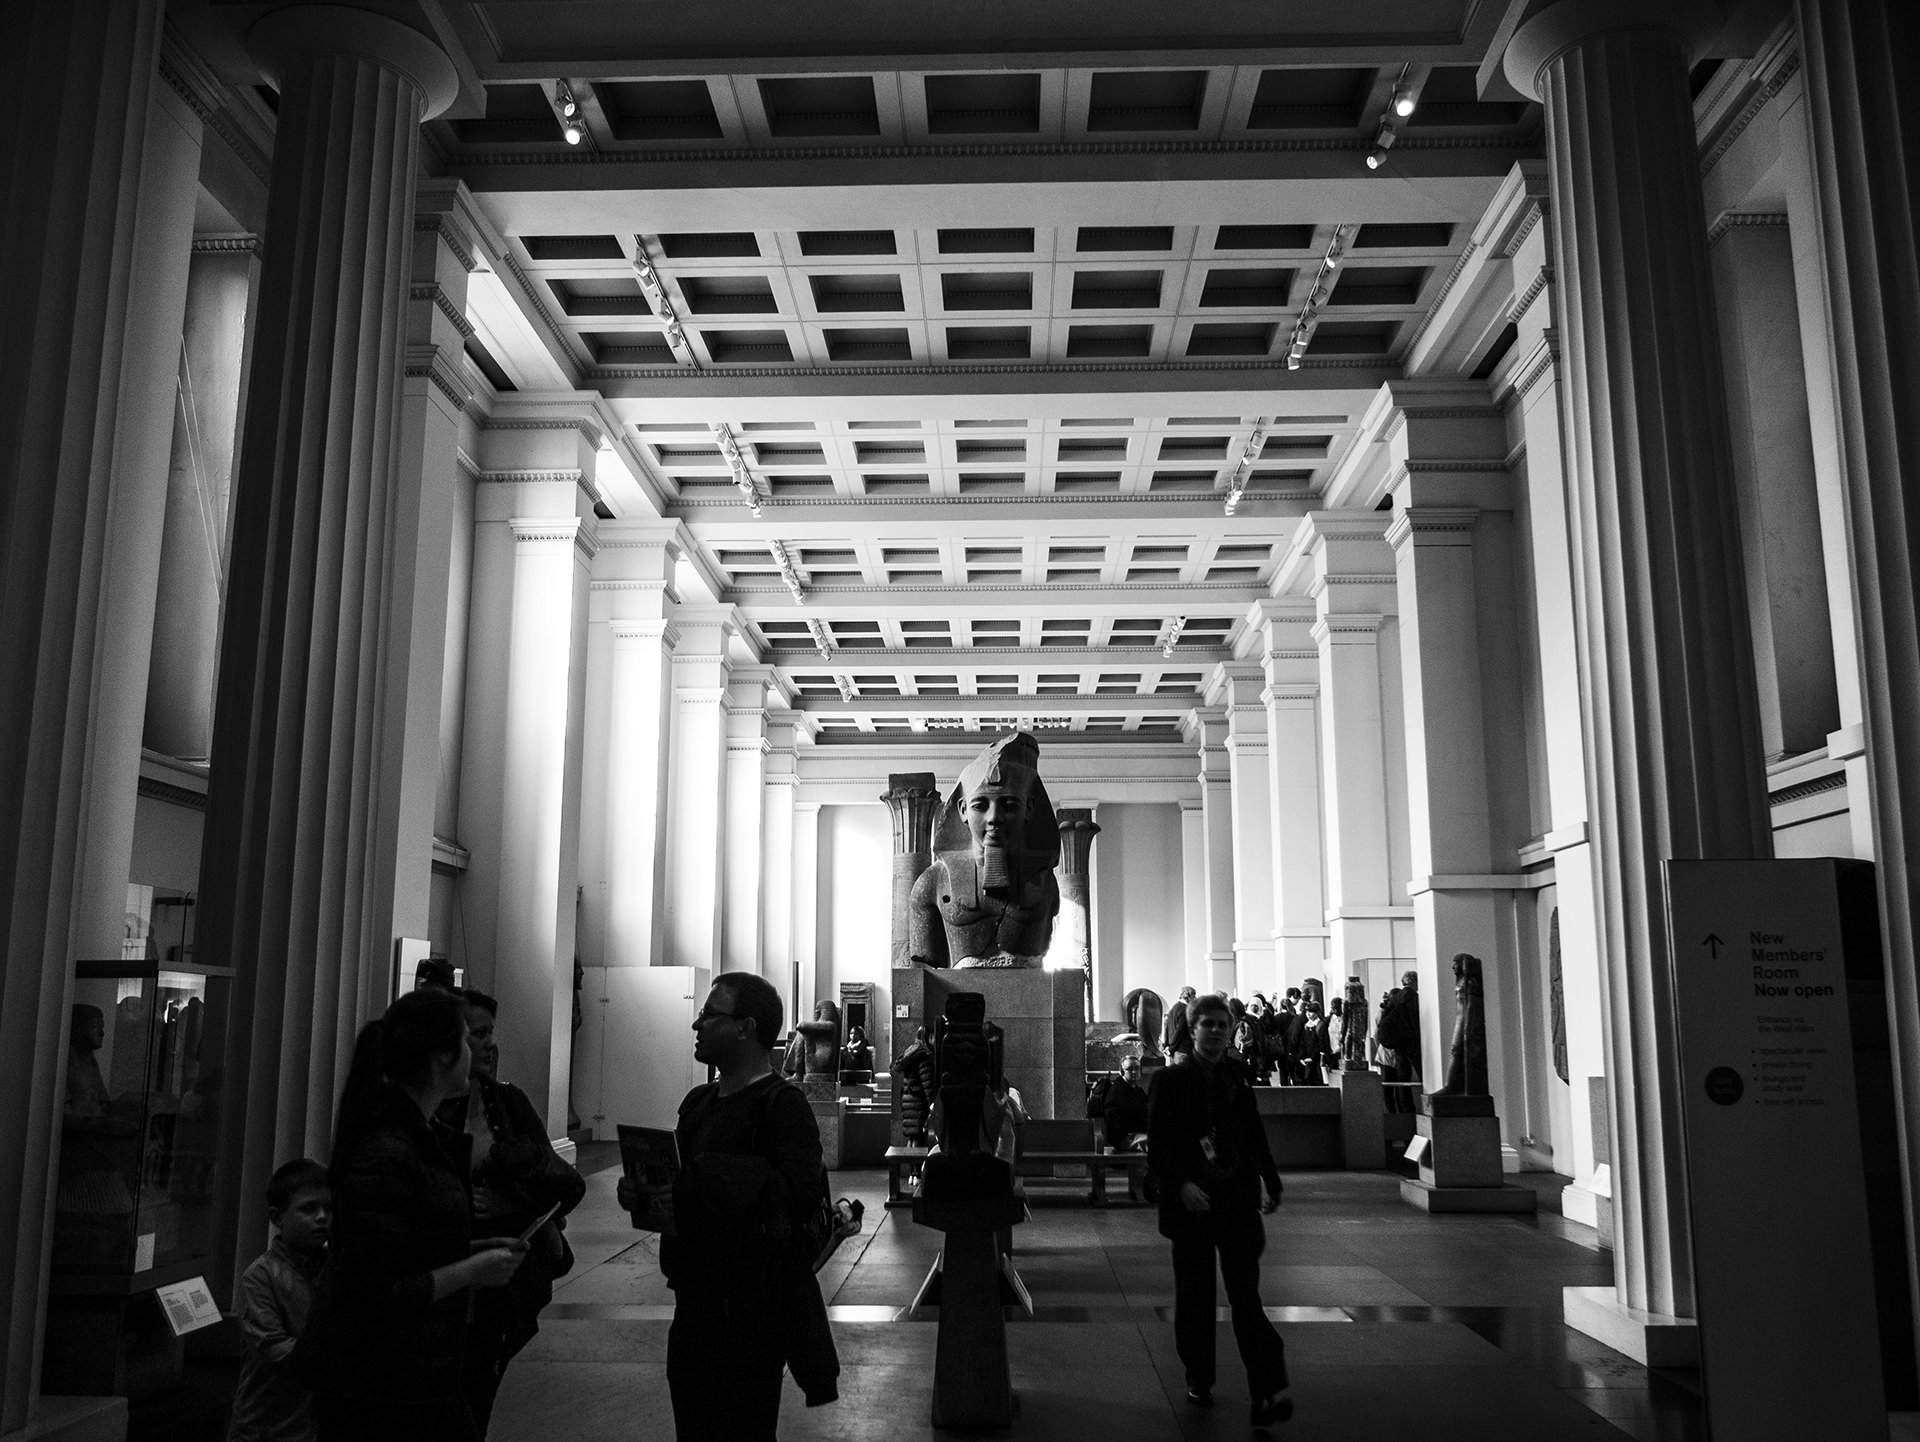 Overview of the Egyptian sculpture gallery at the British Museum